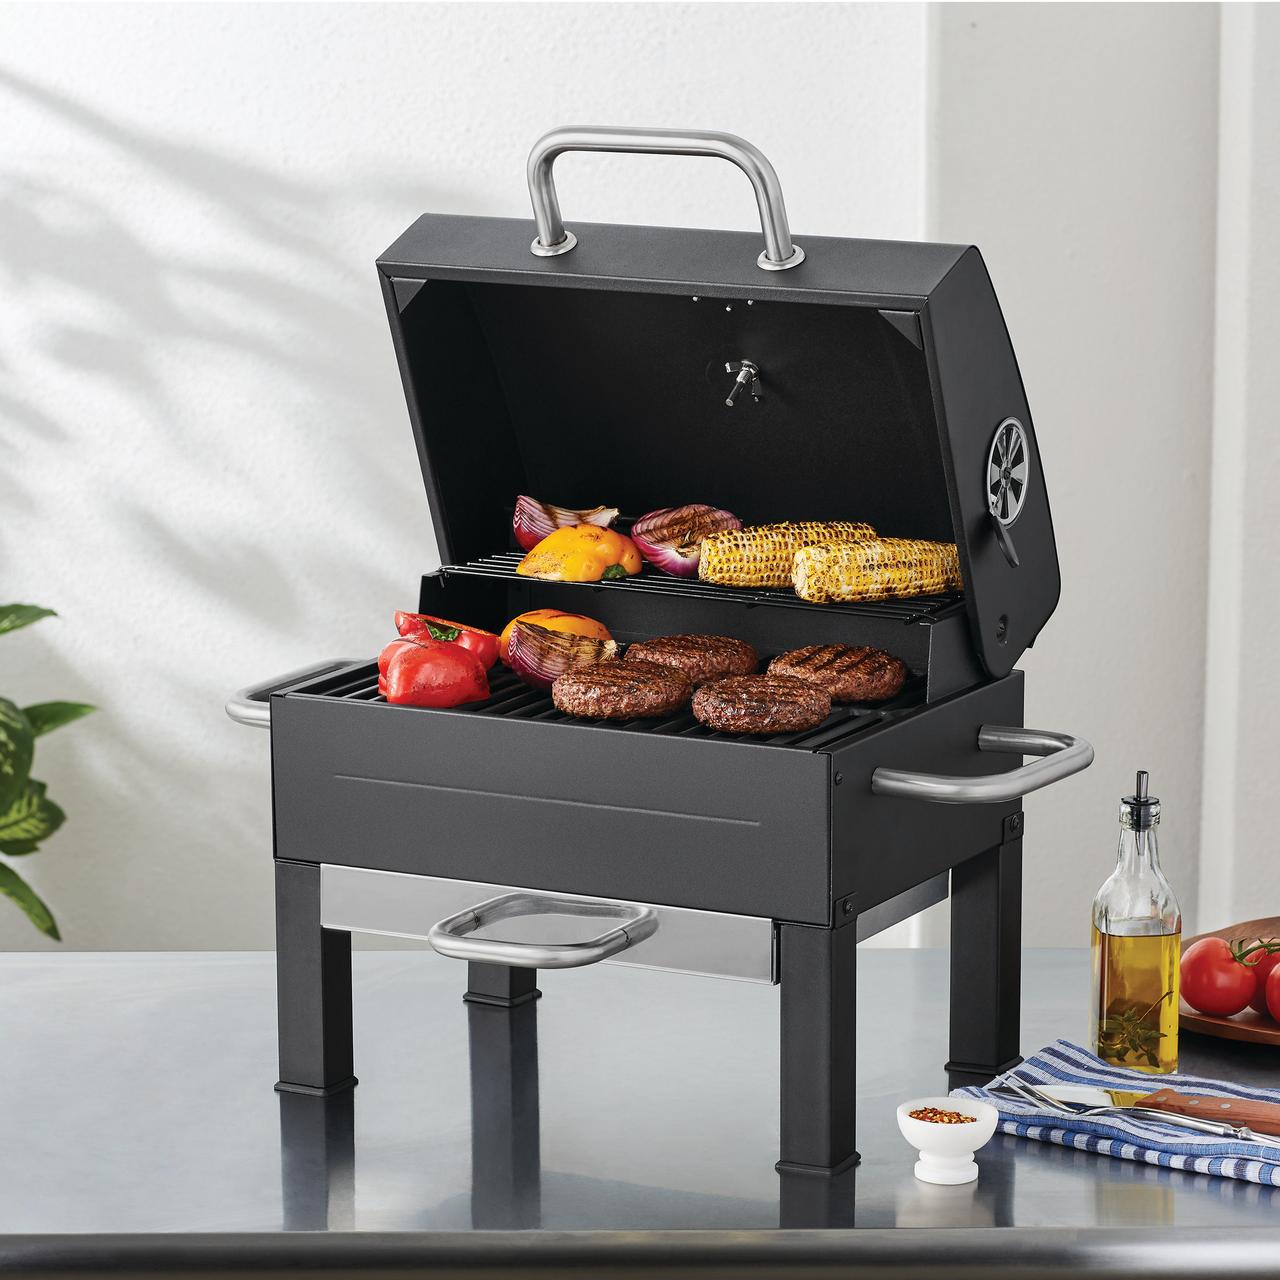 Expert Grill Premium Portable Charcoal Grill, Black and Stainless Steel - image 5 of 18